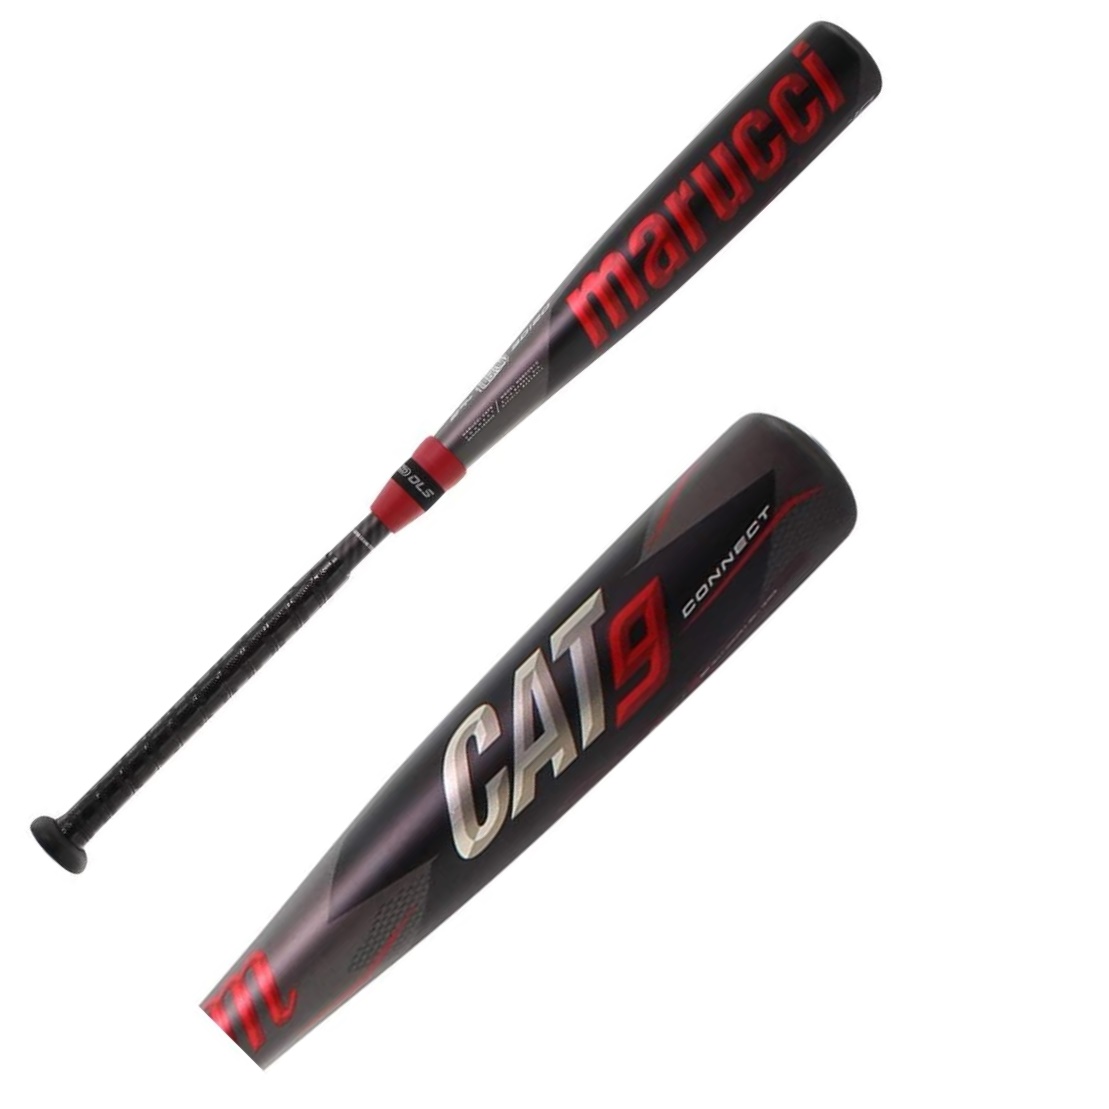 marucci-cat-9-connect-10-usssa-baseball-bat-28-inch-18-oz MSBCC910-2818 Marucci  Utilizing a three-stage thermal treatment process our new AZR alloy offers